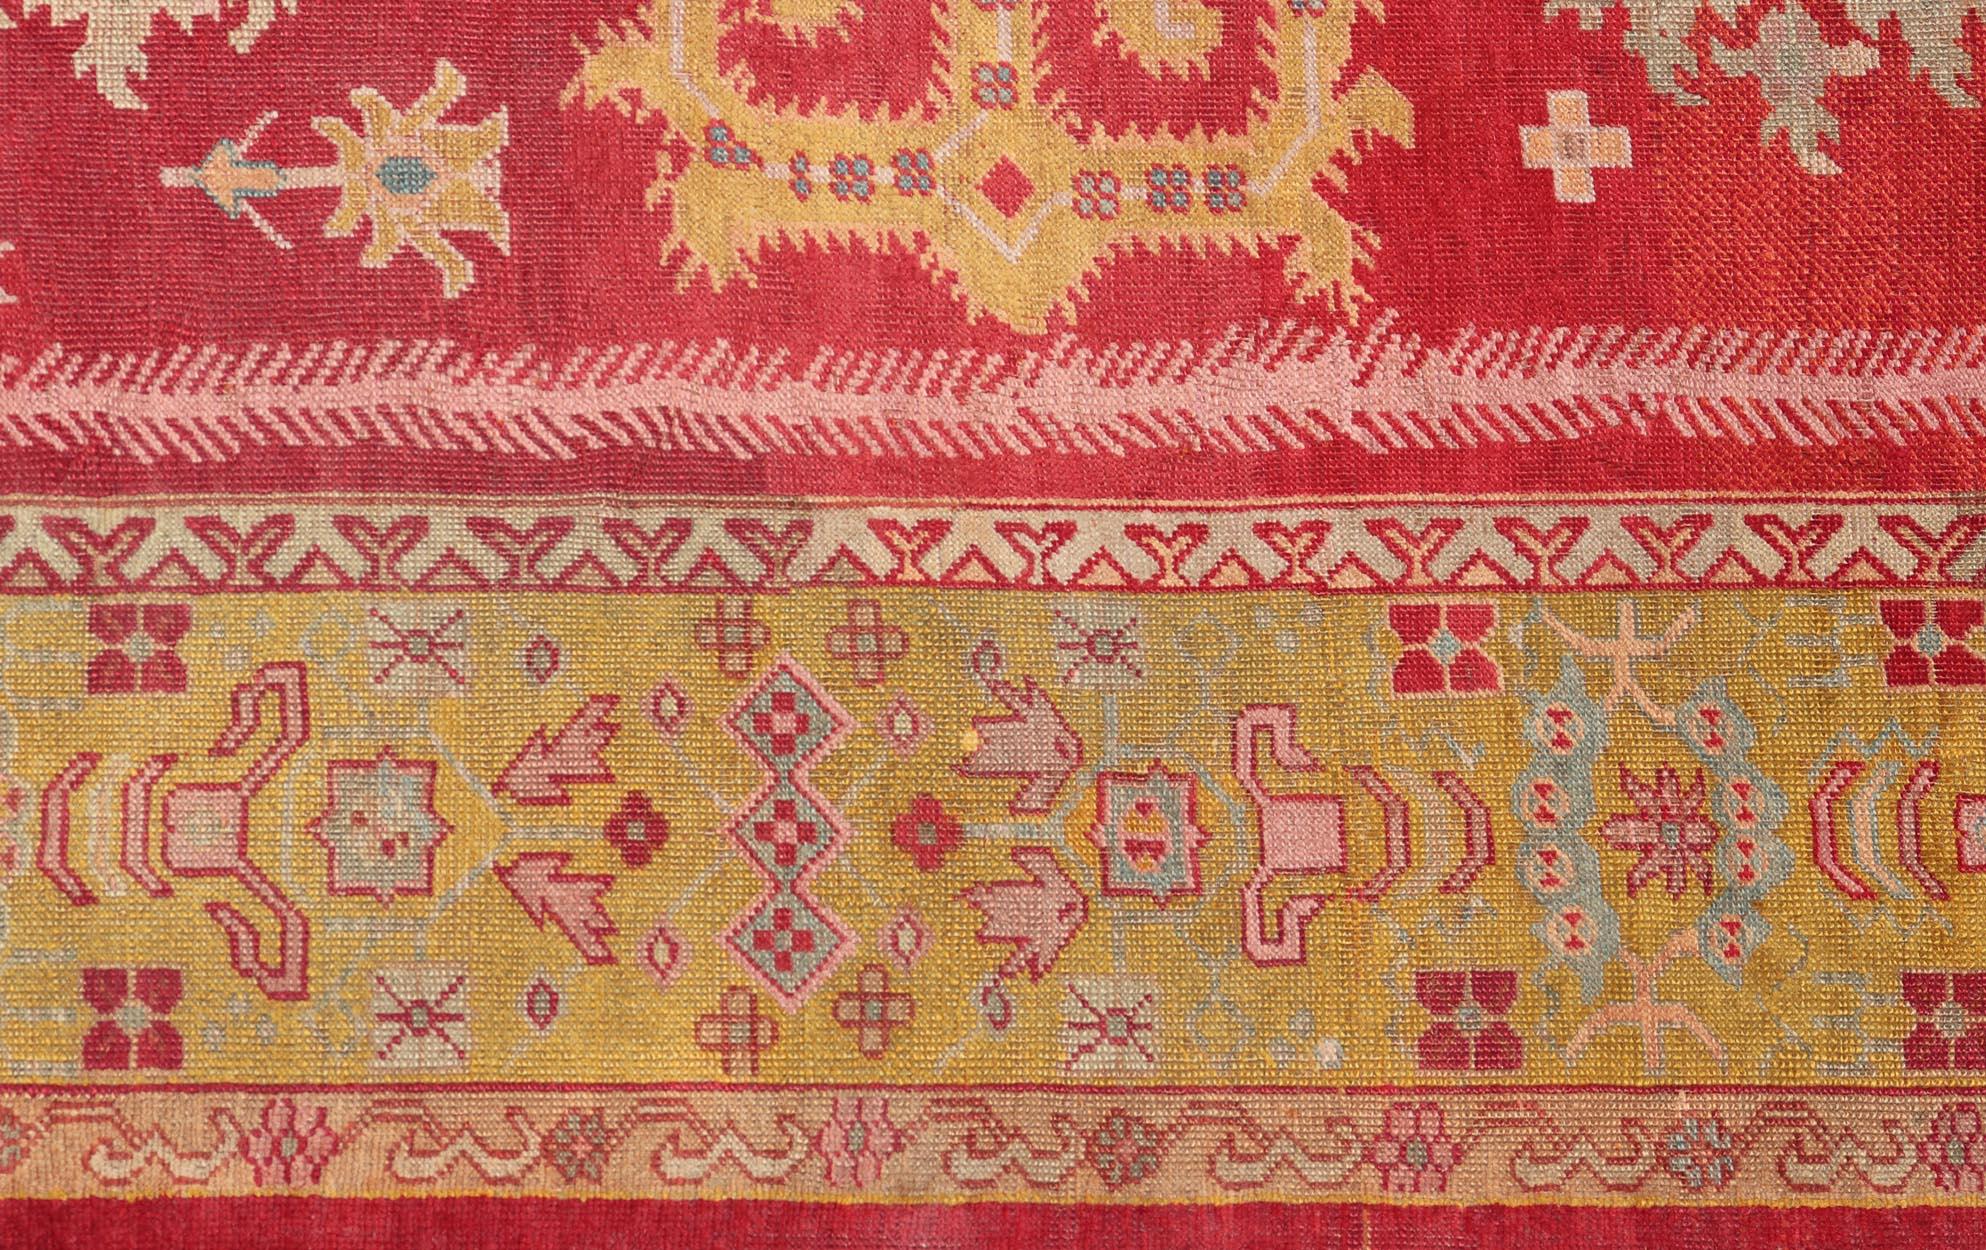 Antique Turkish Oushak Rug in Royal Red and Saffron Gold with Geometric Design For Sale 2